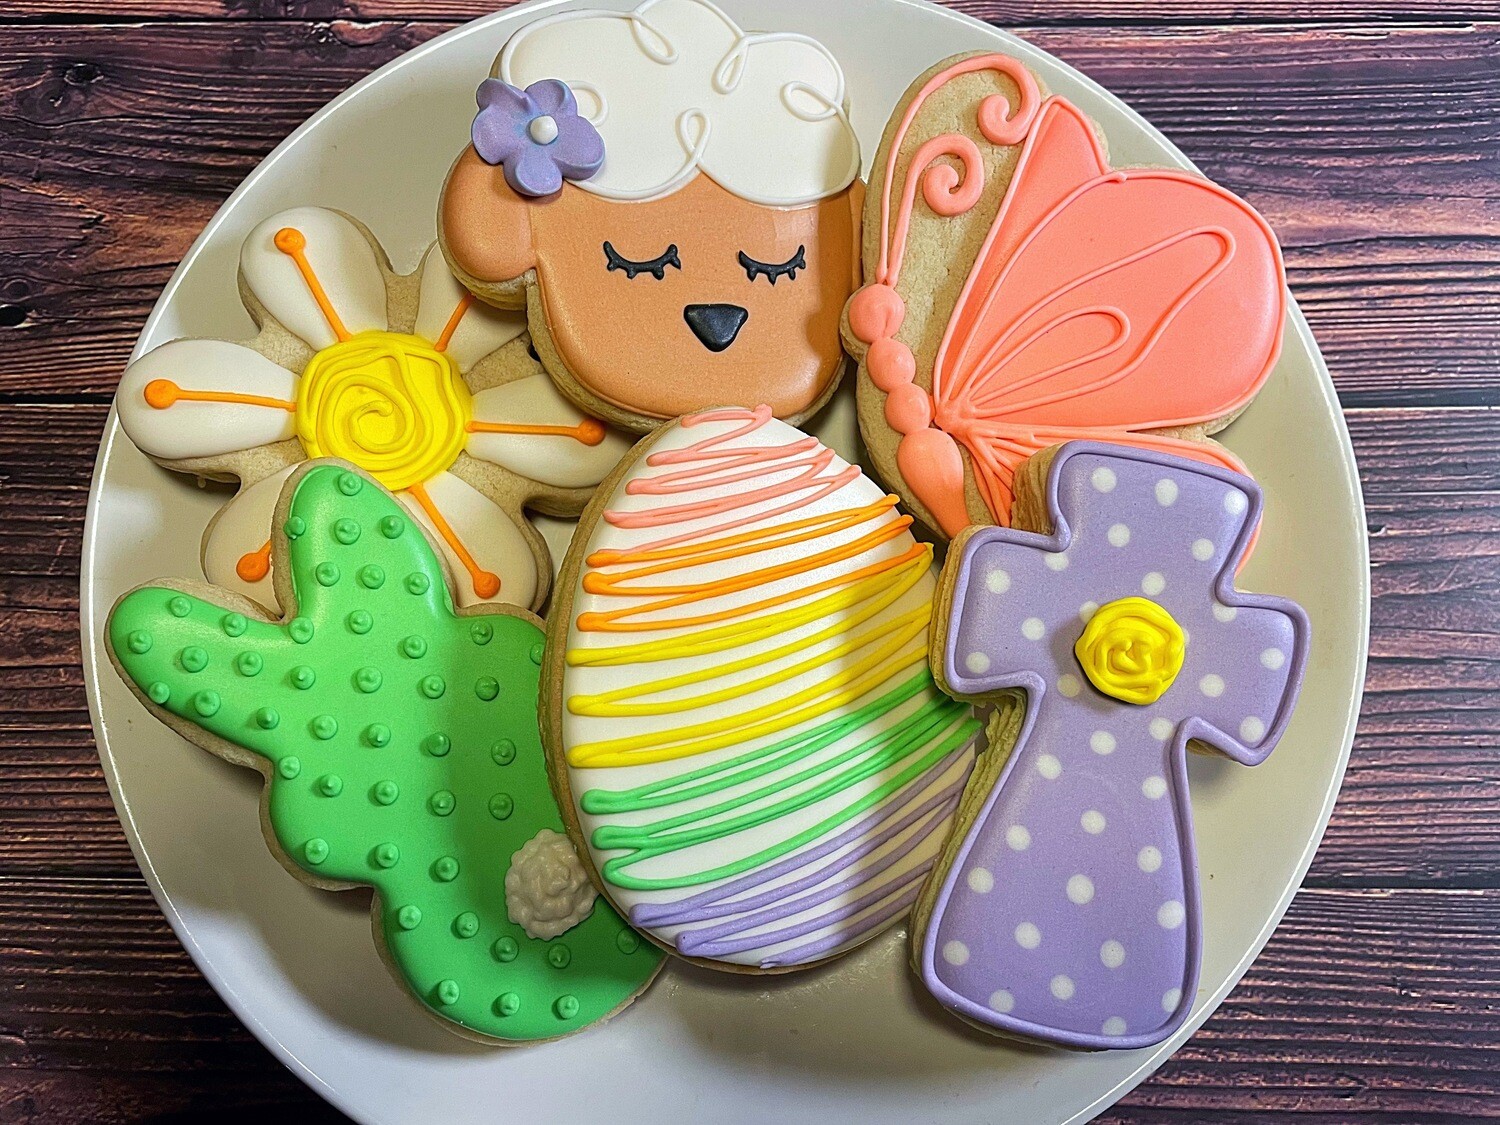 EASTER LAMB Decorating Workshop - SUNDAY, MAR 24th at 4:00 p.m. (TYLER)